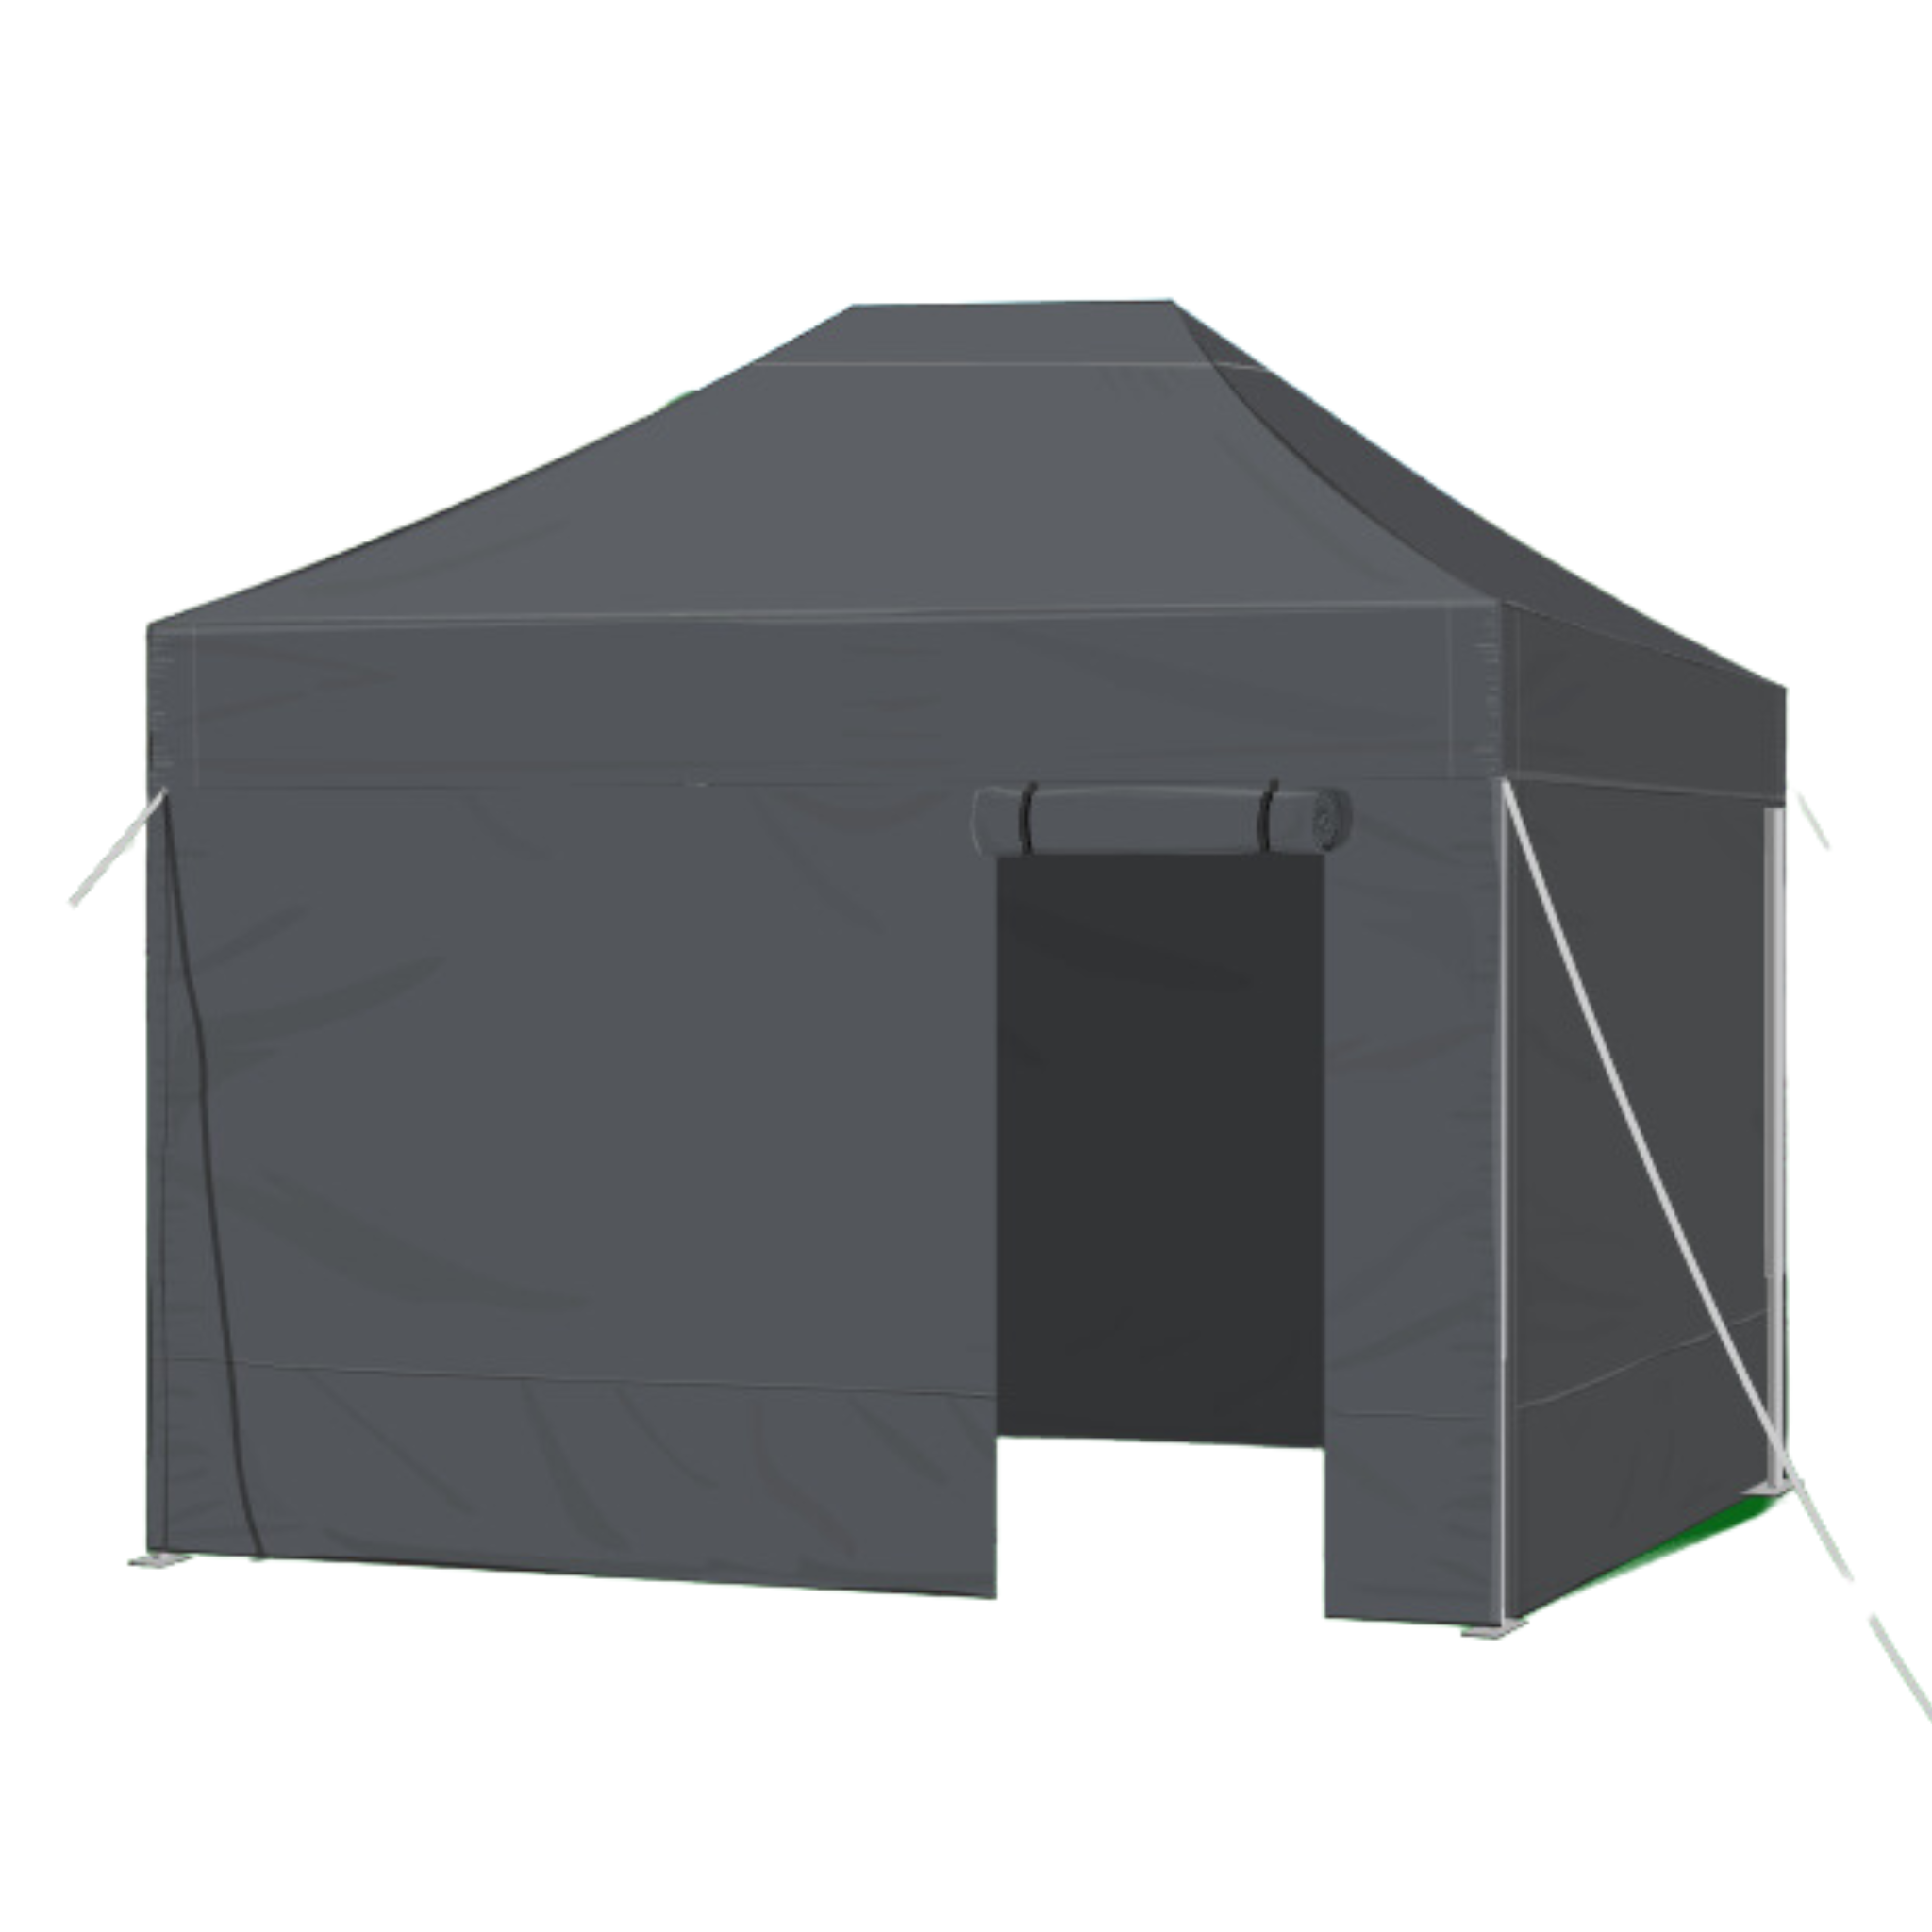 Lavabis folding tent system side walls 3x4.5 meters - 0